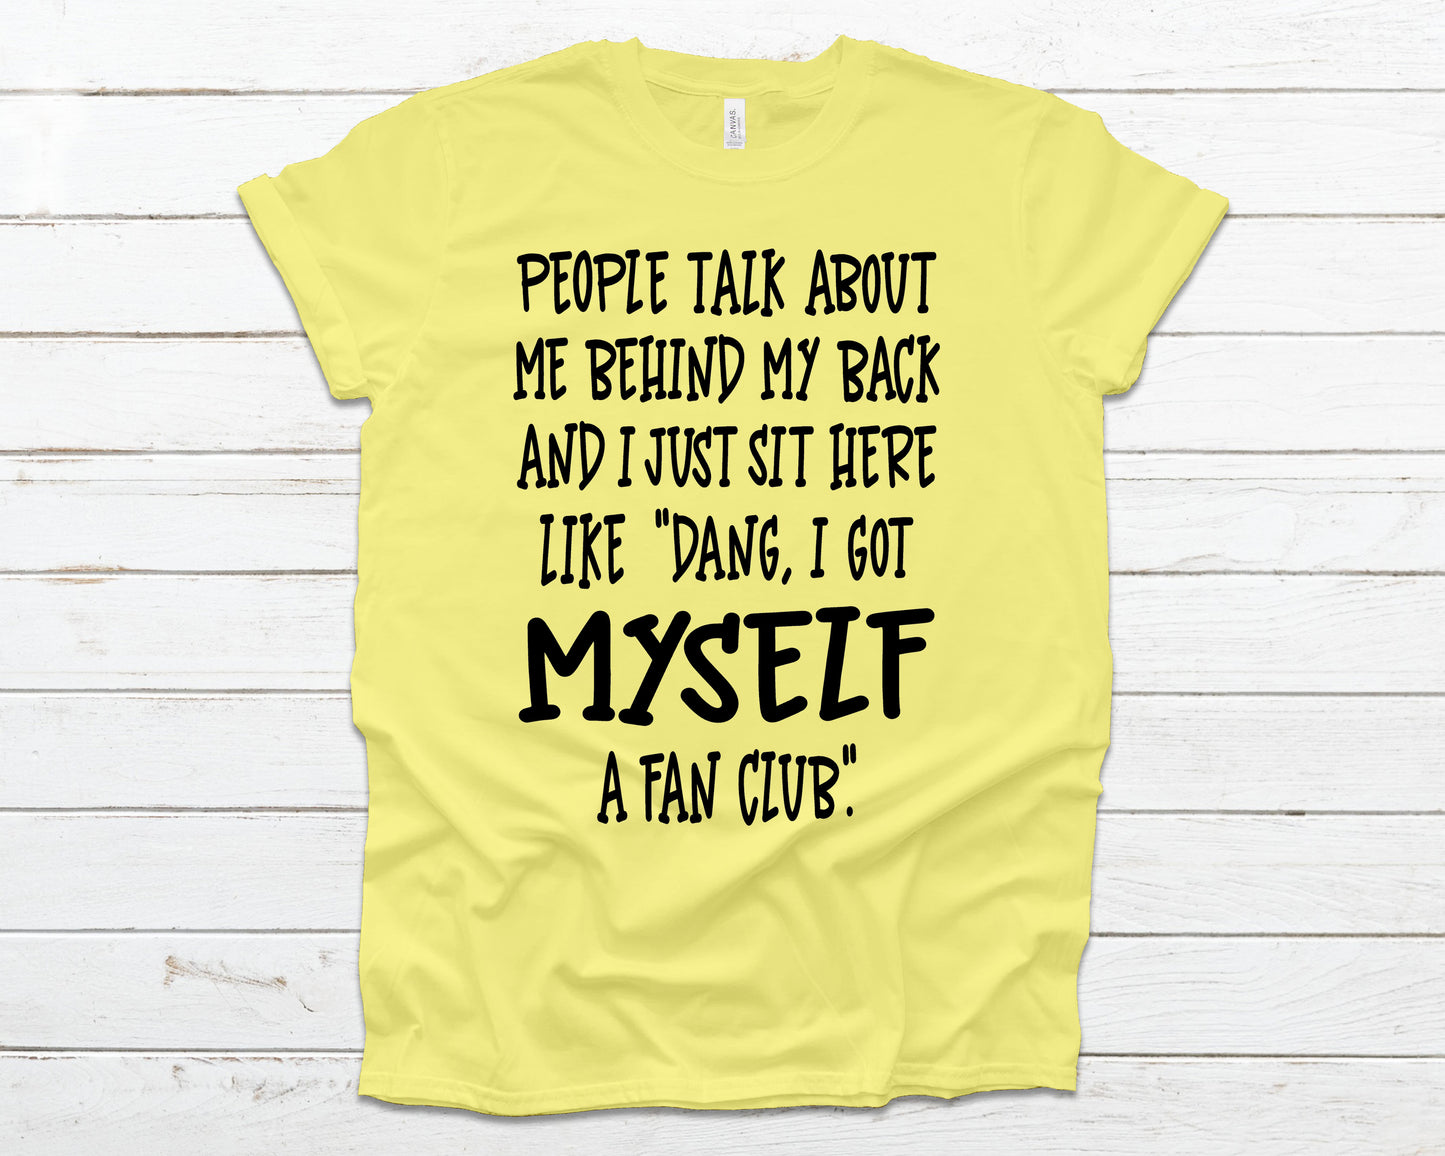 People talk about me behind my back